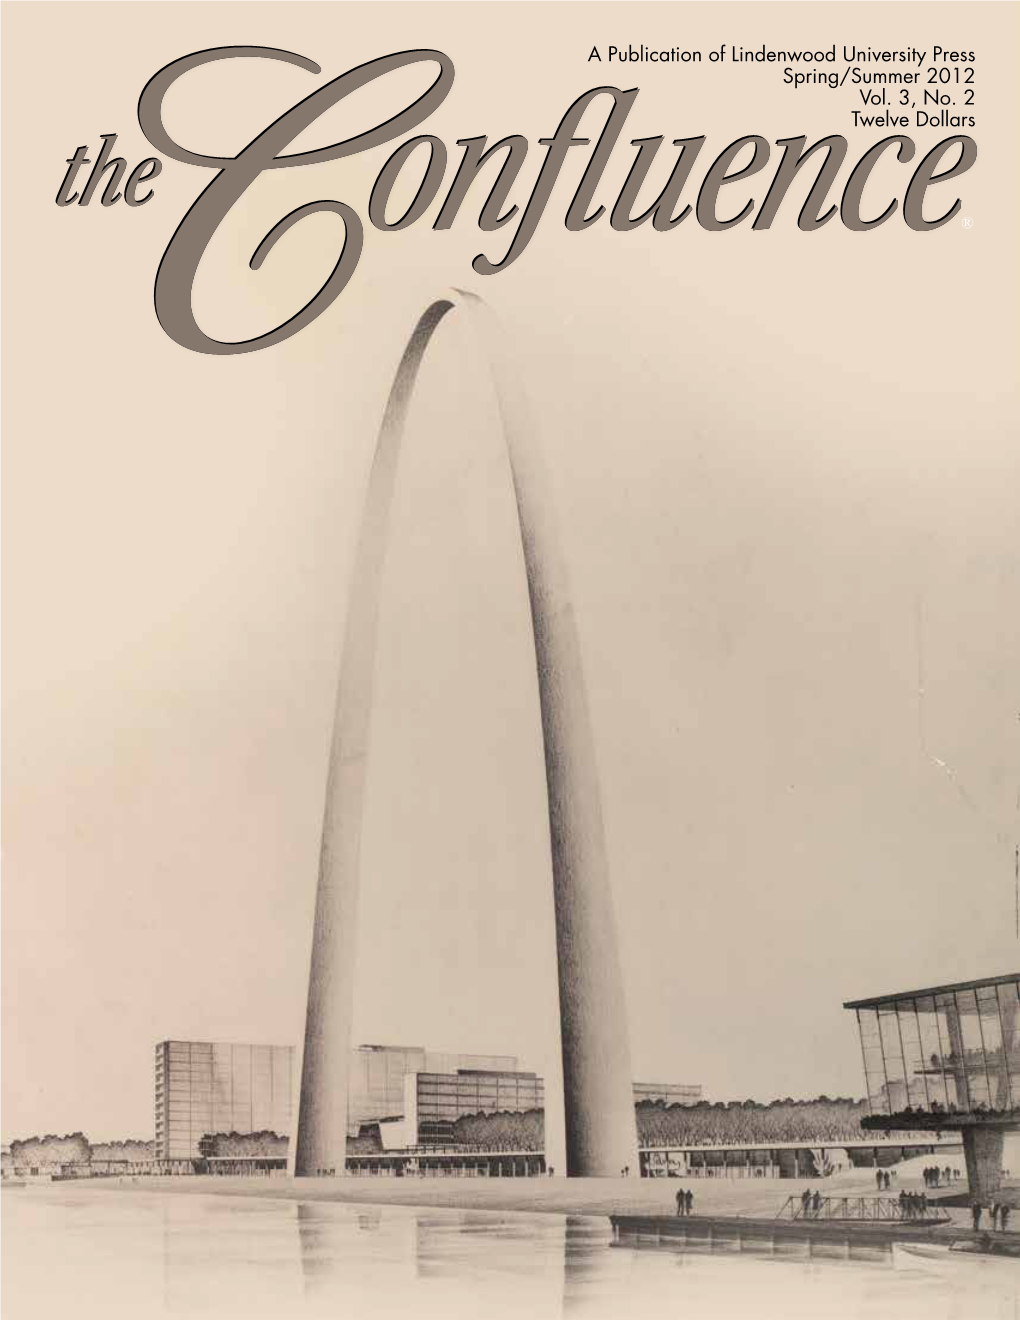 The Confluence | 1 Proud Winner of the Missouri Humanities Council’S 2011 Award for Distinguished Achievement in Literature